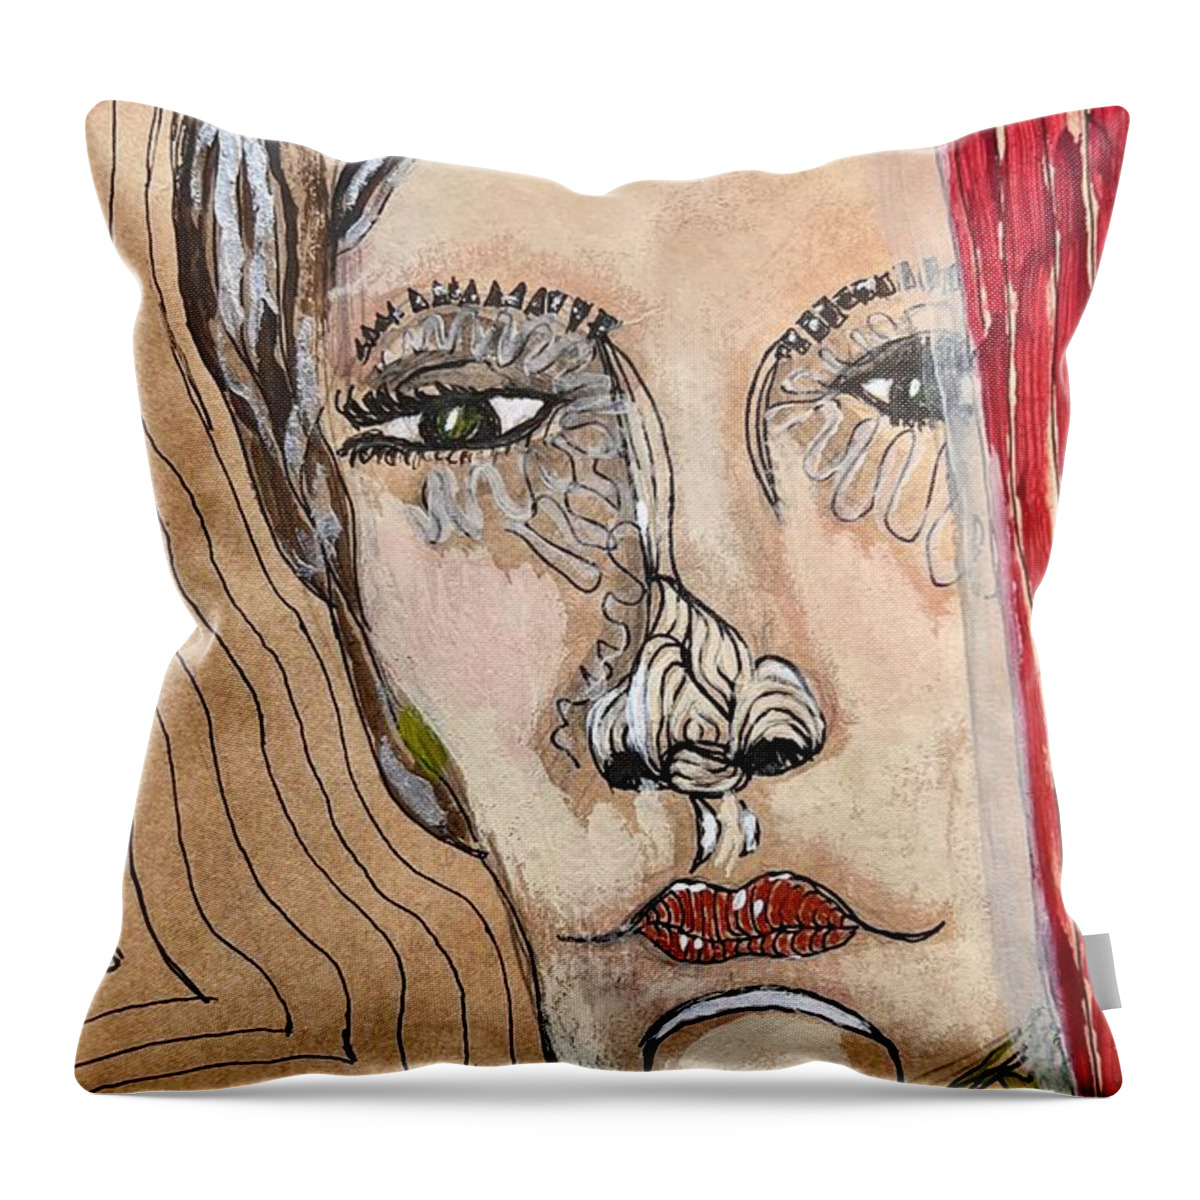  Throw Pillow featuring the painting Indiscretion by Theresa Marie Johnson